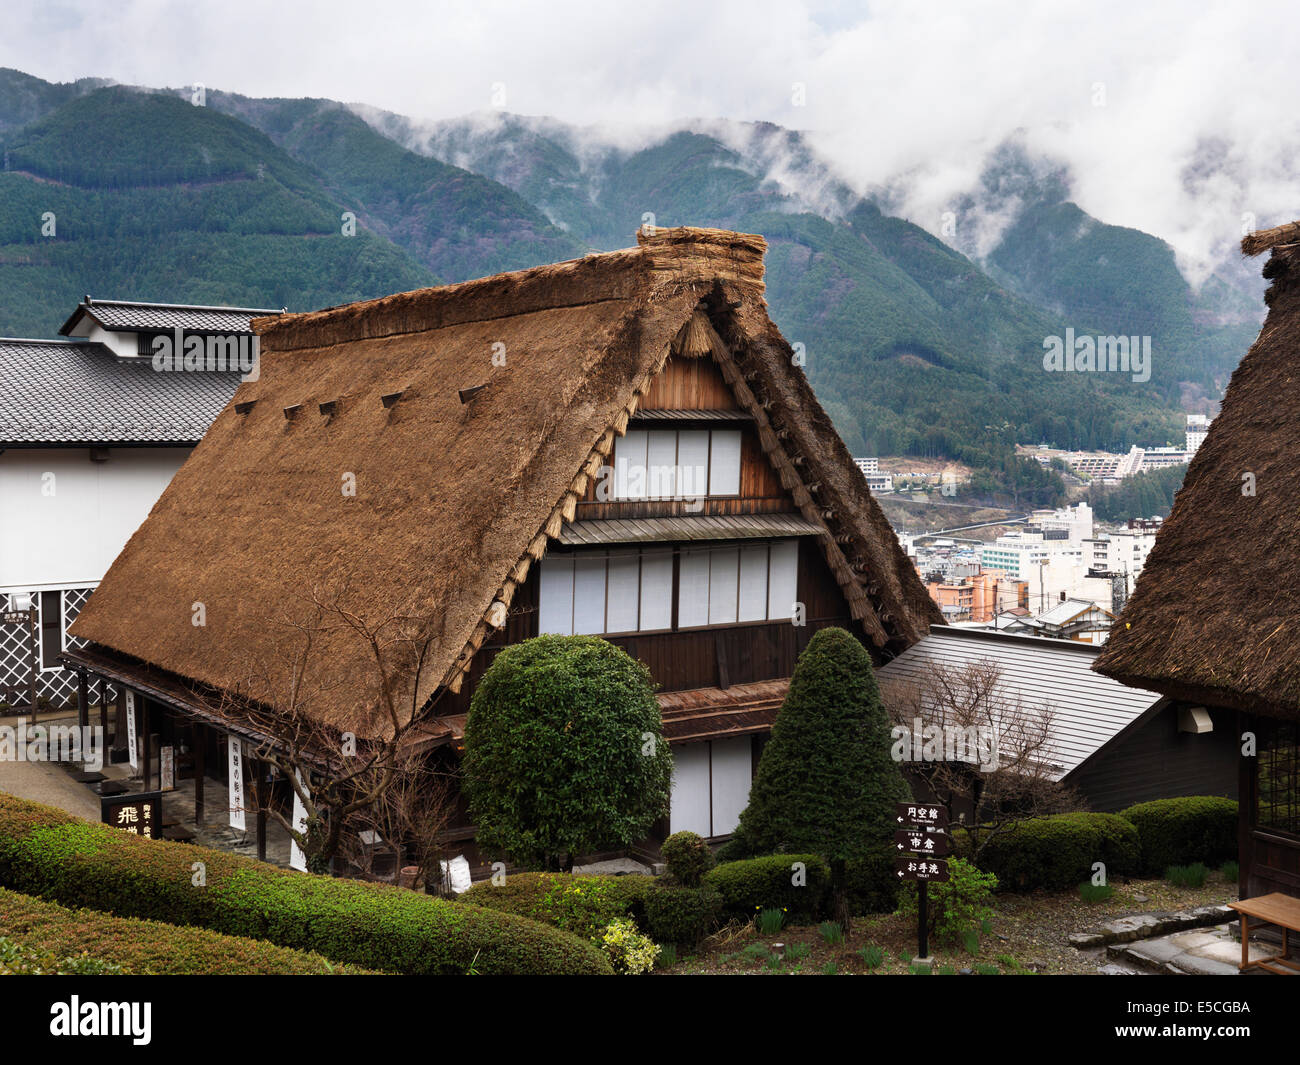 Thatched historic Japanese house at Gero Onsen Gassho Village, Gifu Prefecture, Japan 2014 Stock Photo